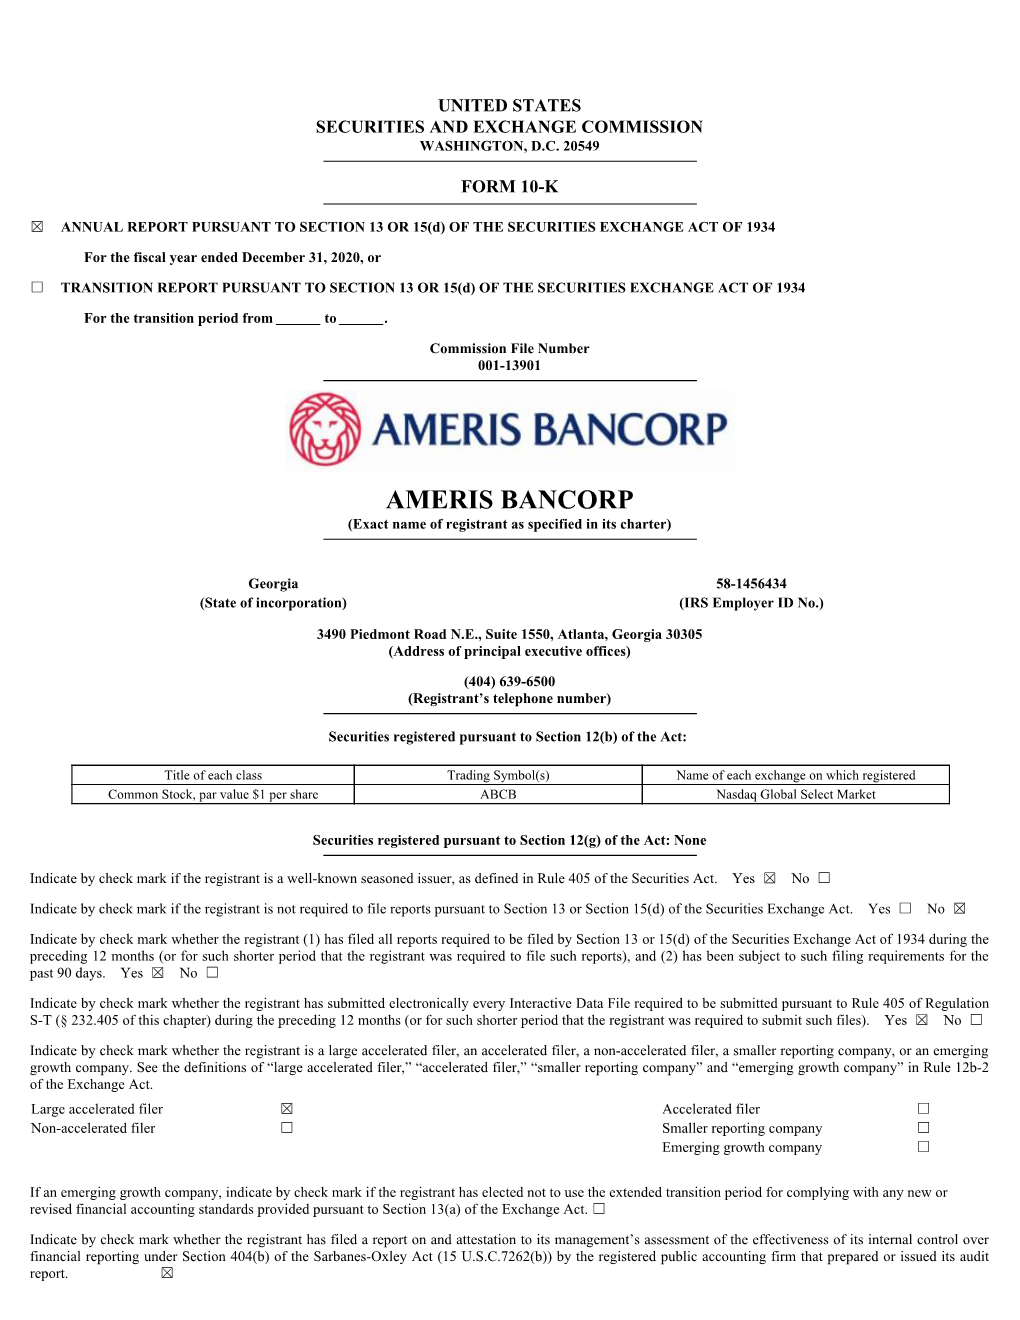 AMERIS BANCORP (Exact Name of Registrant As Specified in Its Charter)